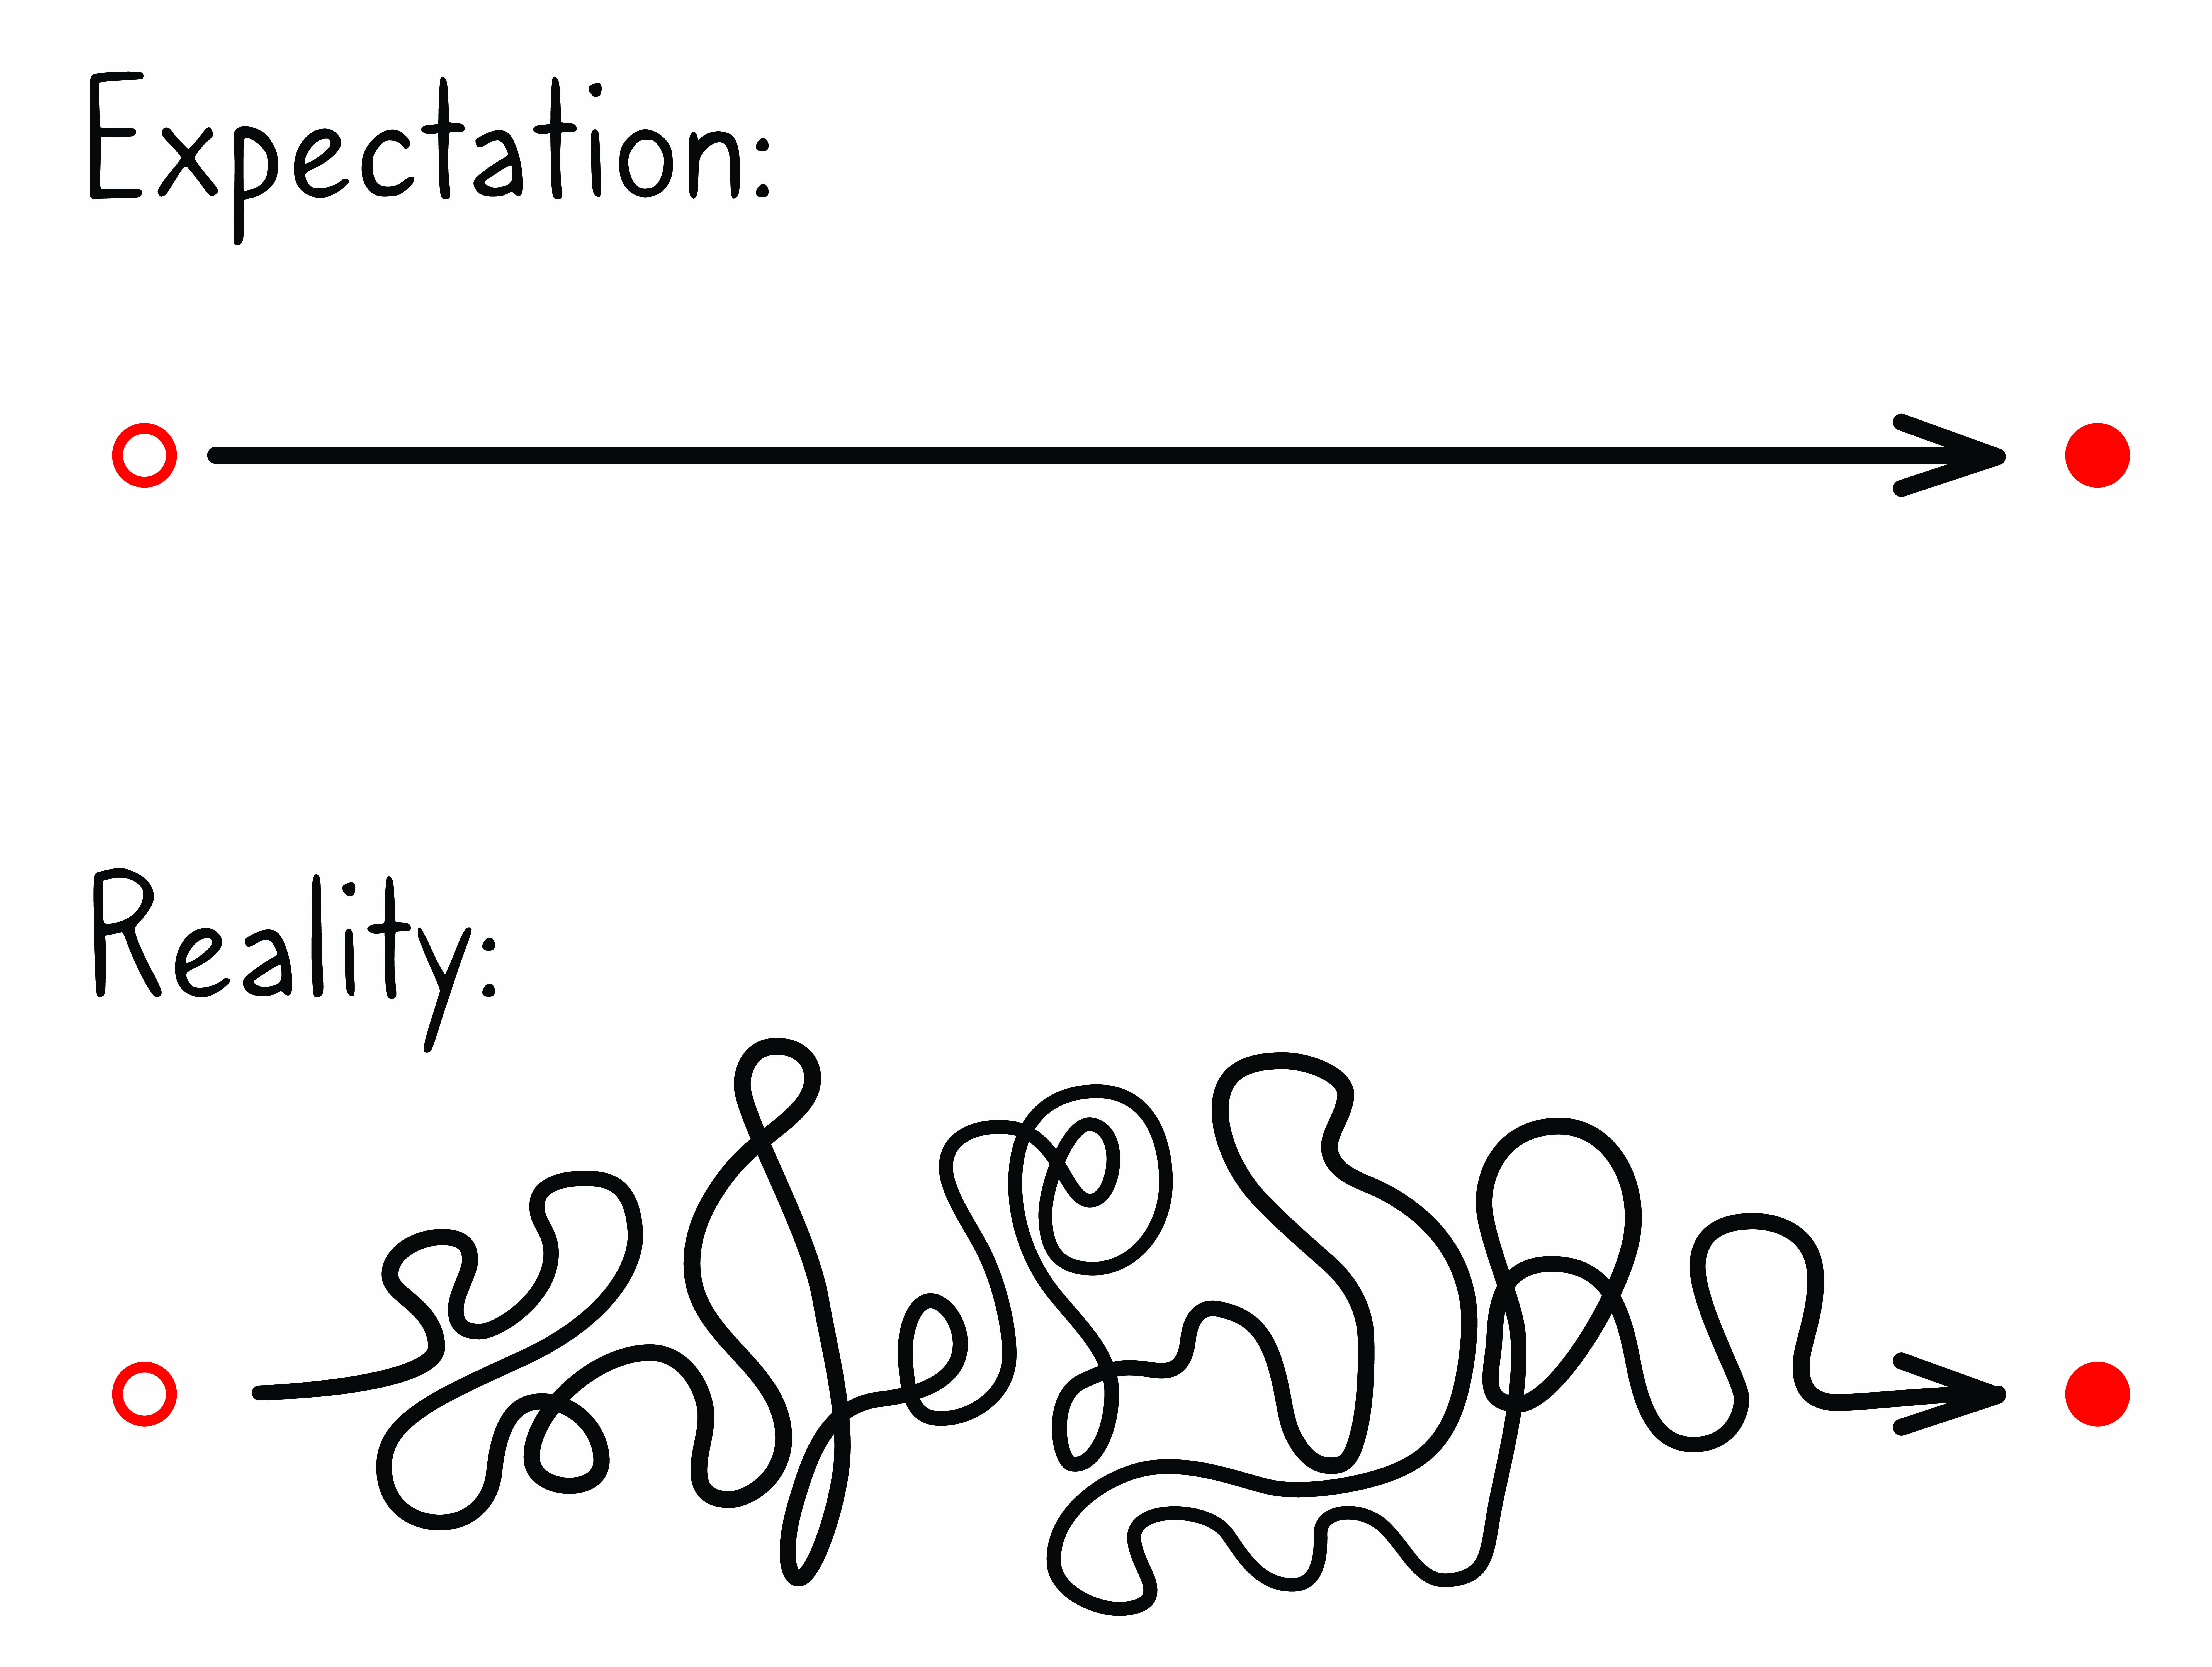 Expectation with a straight line, reality with a line that dips and curves all over the place